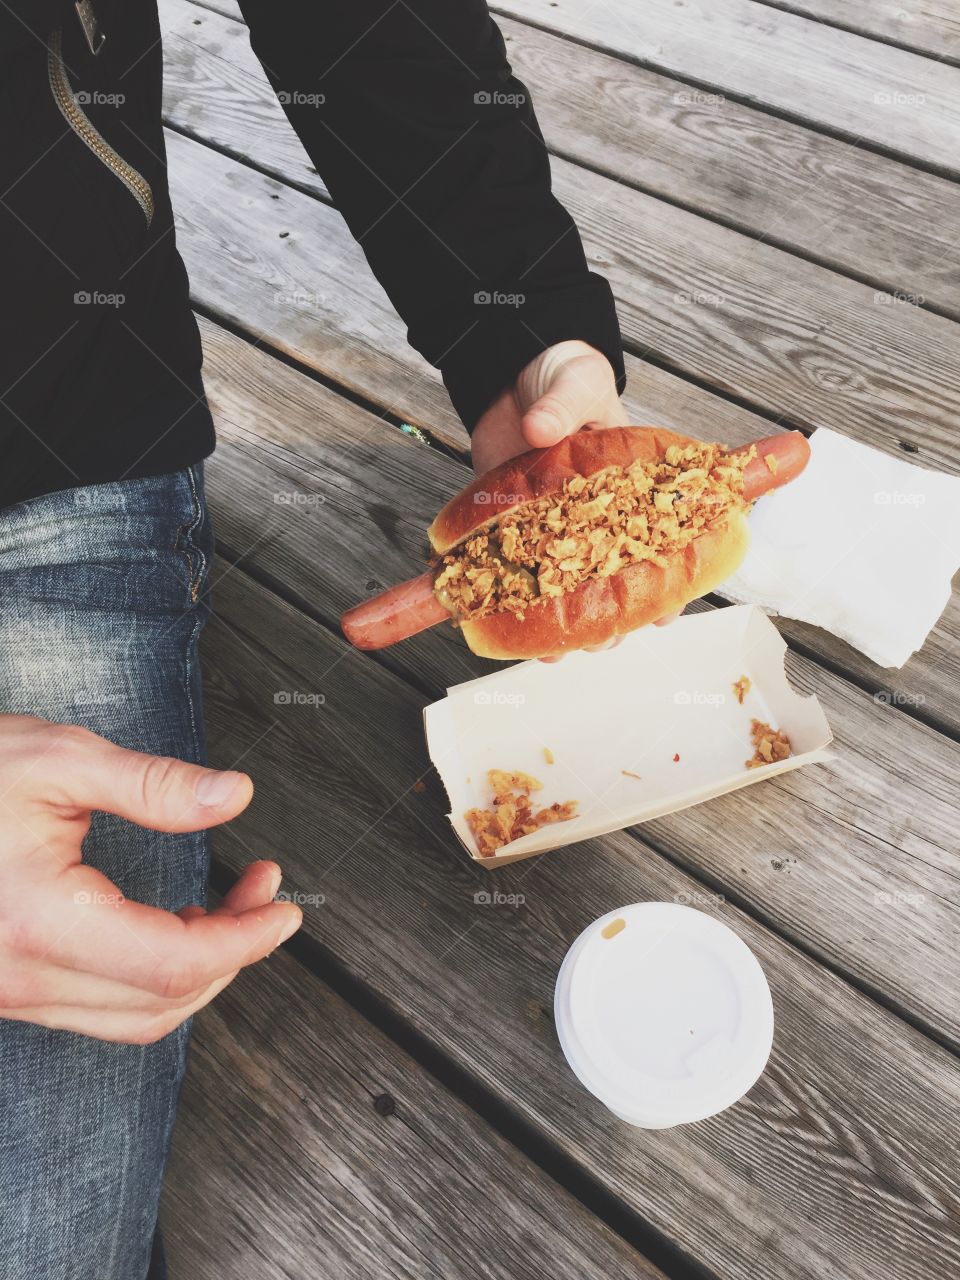 Close-up of person's hand holding hot dog